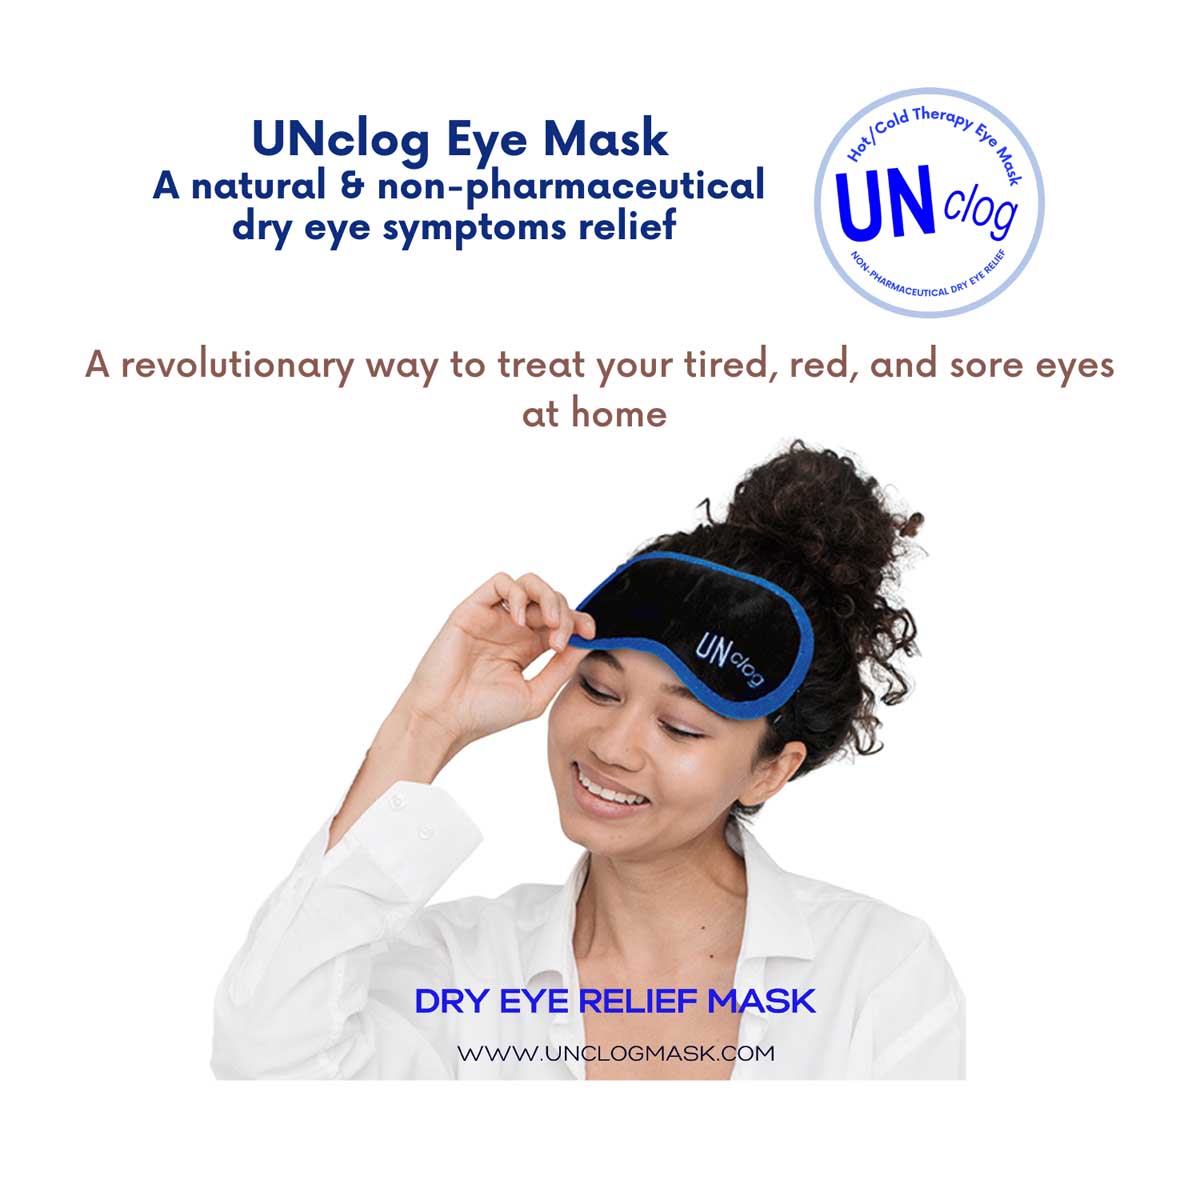 A revolutionary way to treat your tired, red, and sore eyes at home.